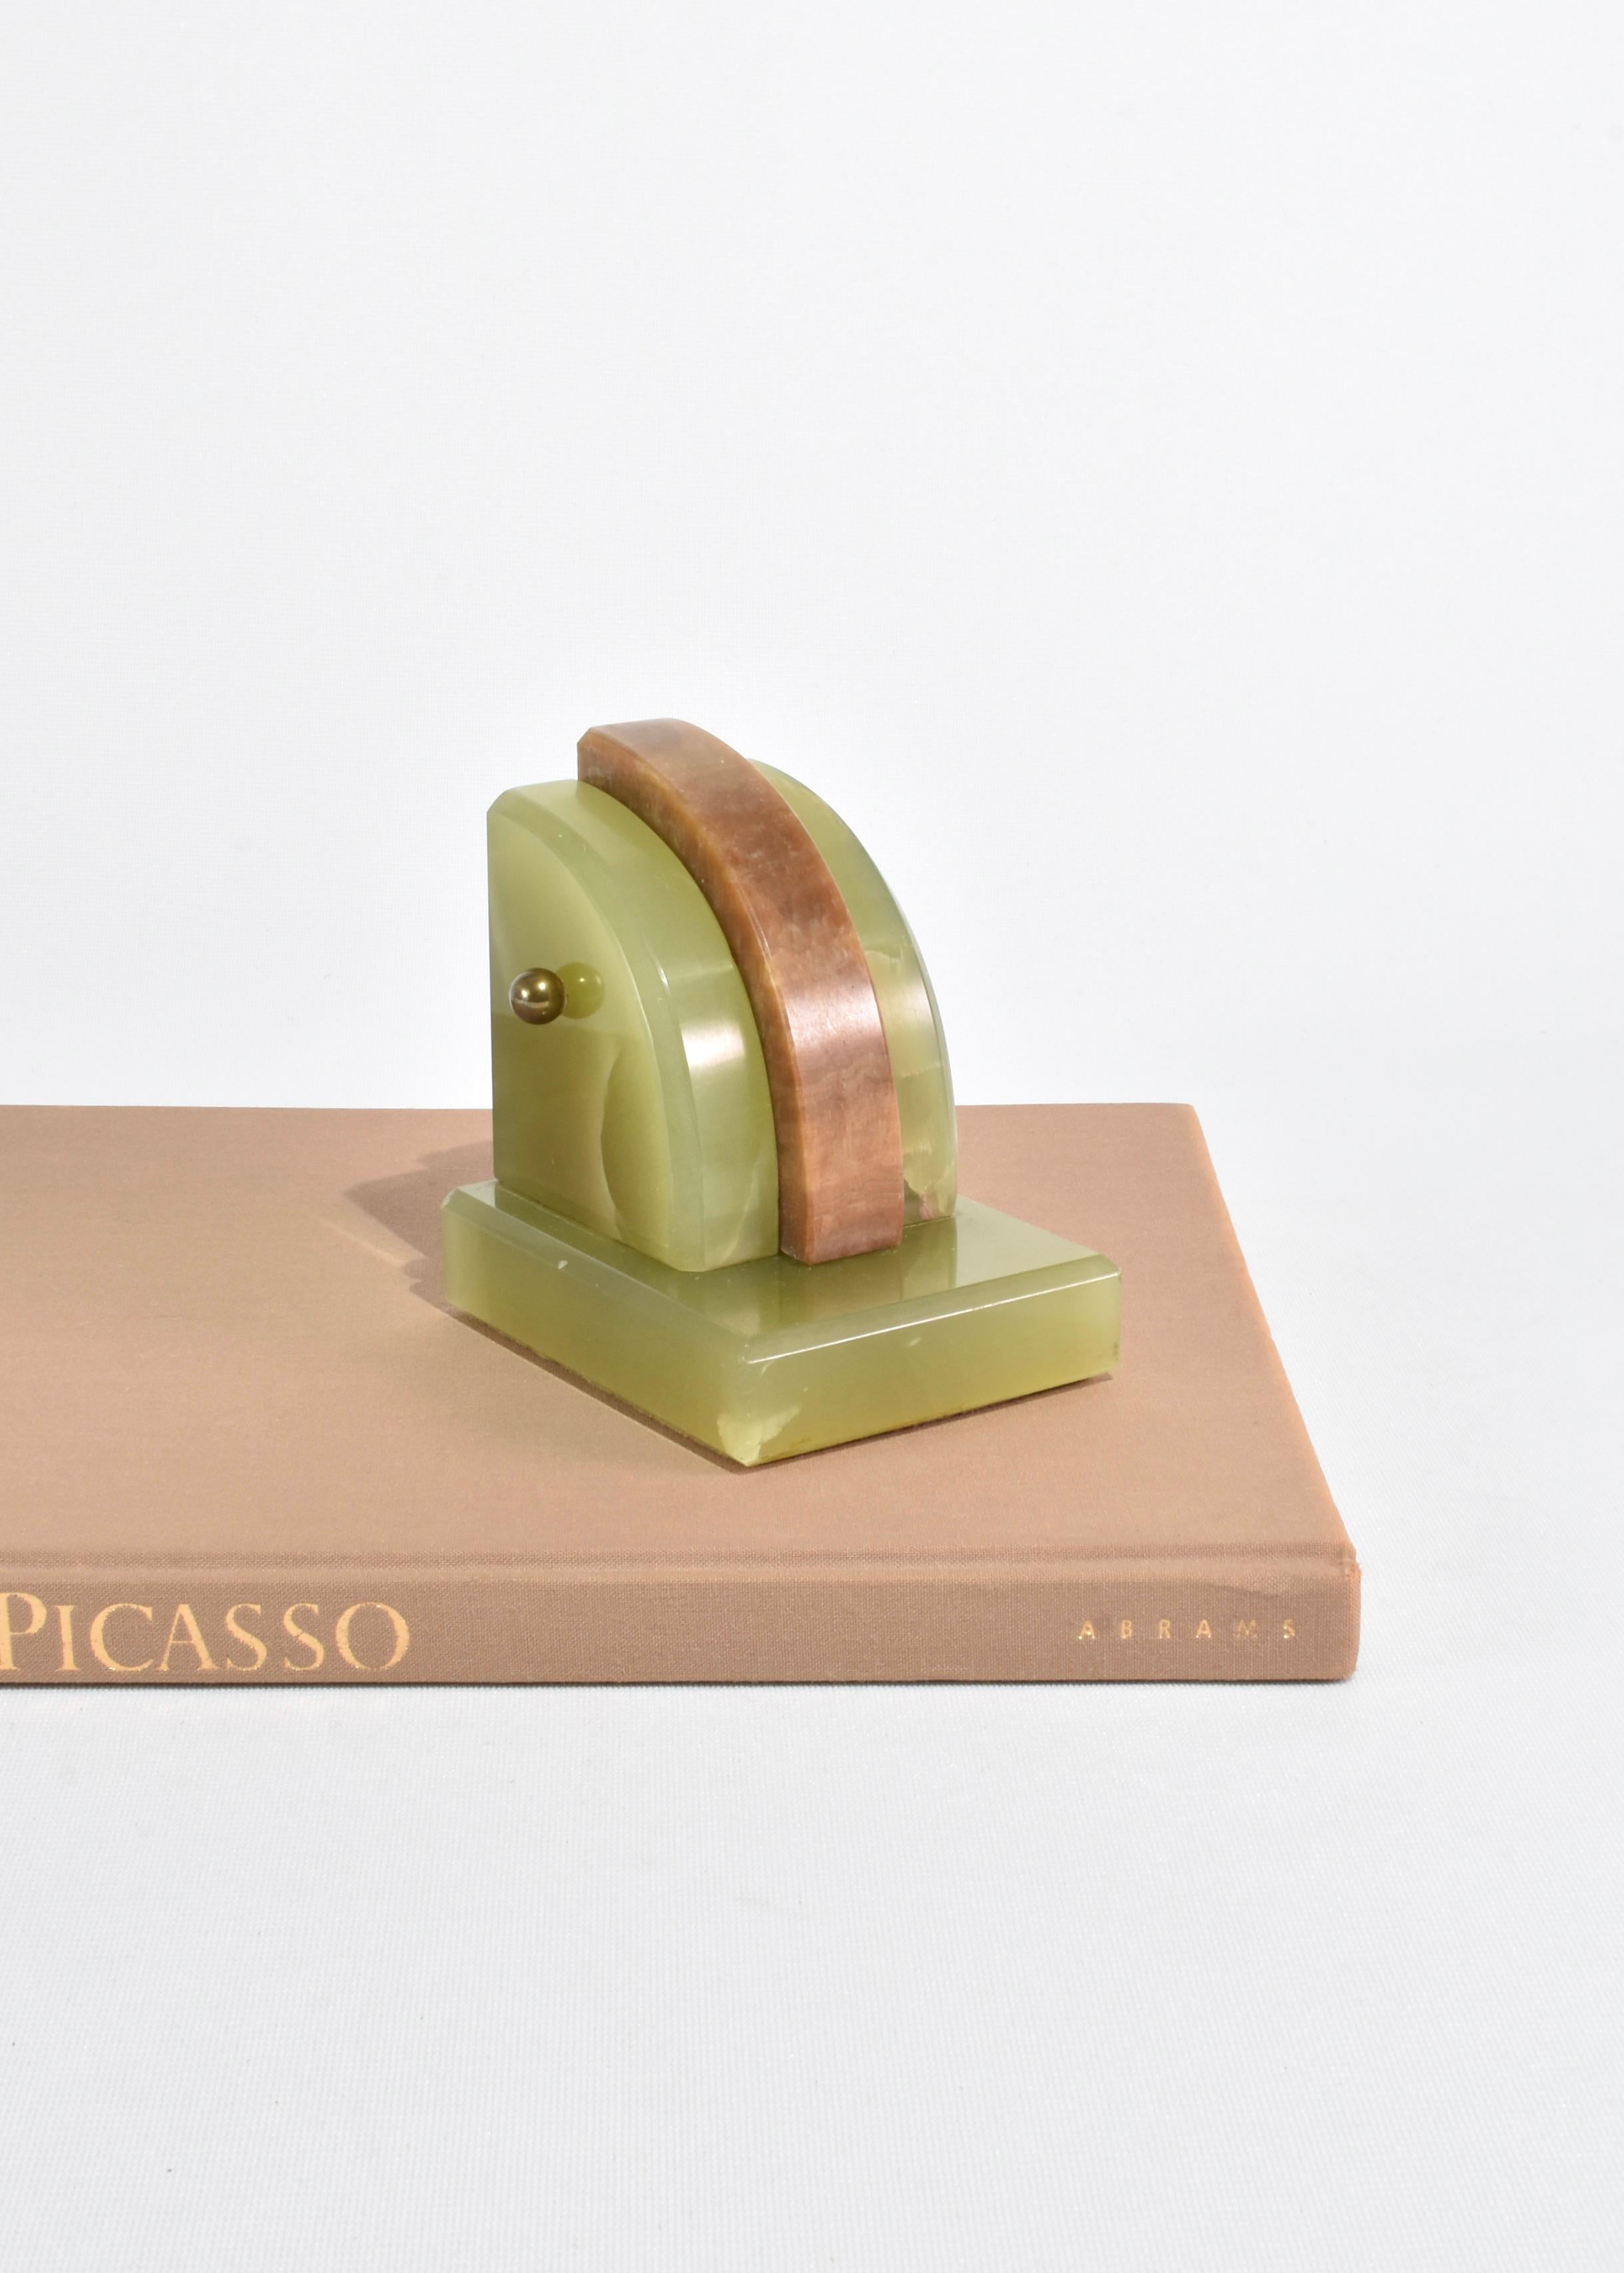 Stunning, curved green onyx bookends with brass knob detail. Set of two, ca. 1930s.